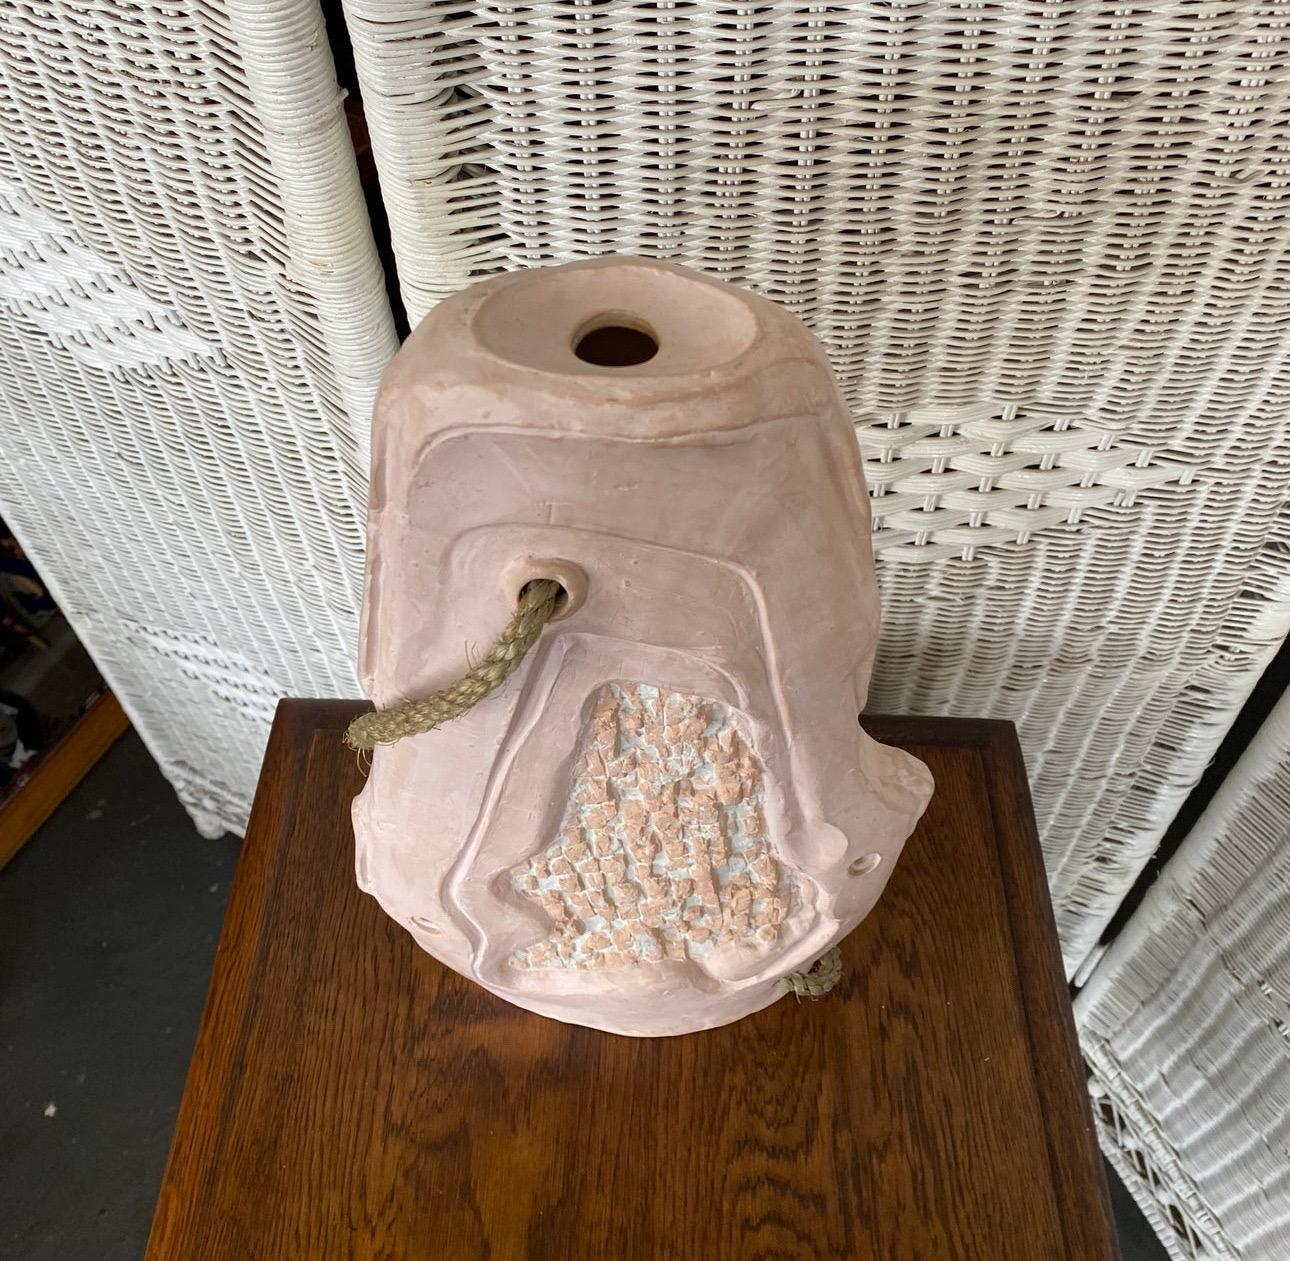 🌟 Introducing a Vintage Gem: 1980's Post Modern, Abstract California Pottery Vase! 🌟

Dive into the retro vibes with this stunning 1980's abstract California pottery vase in captivating pink! Marked 